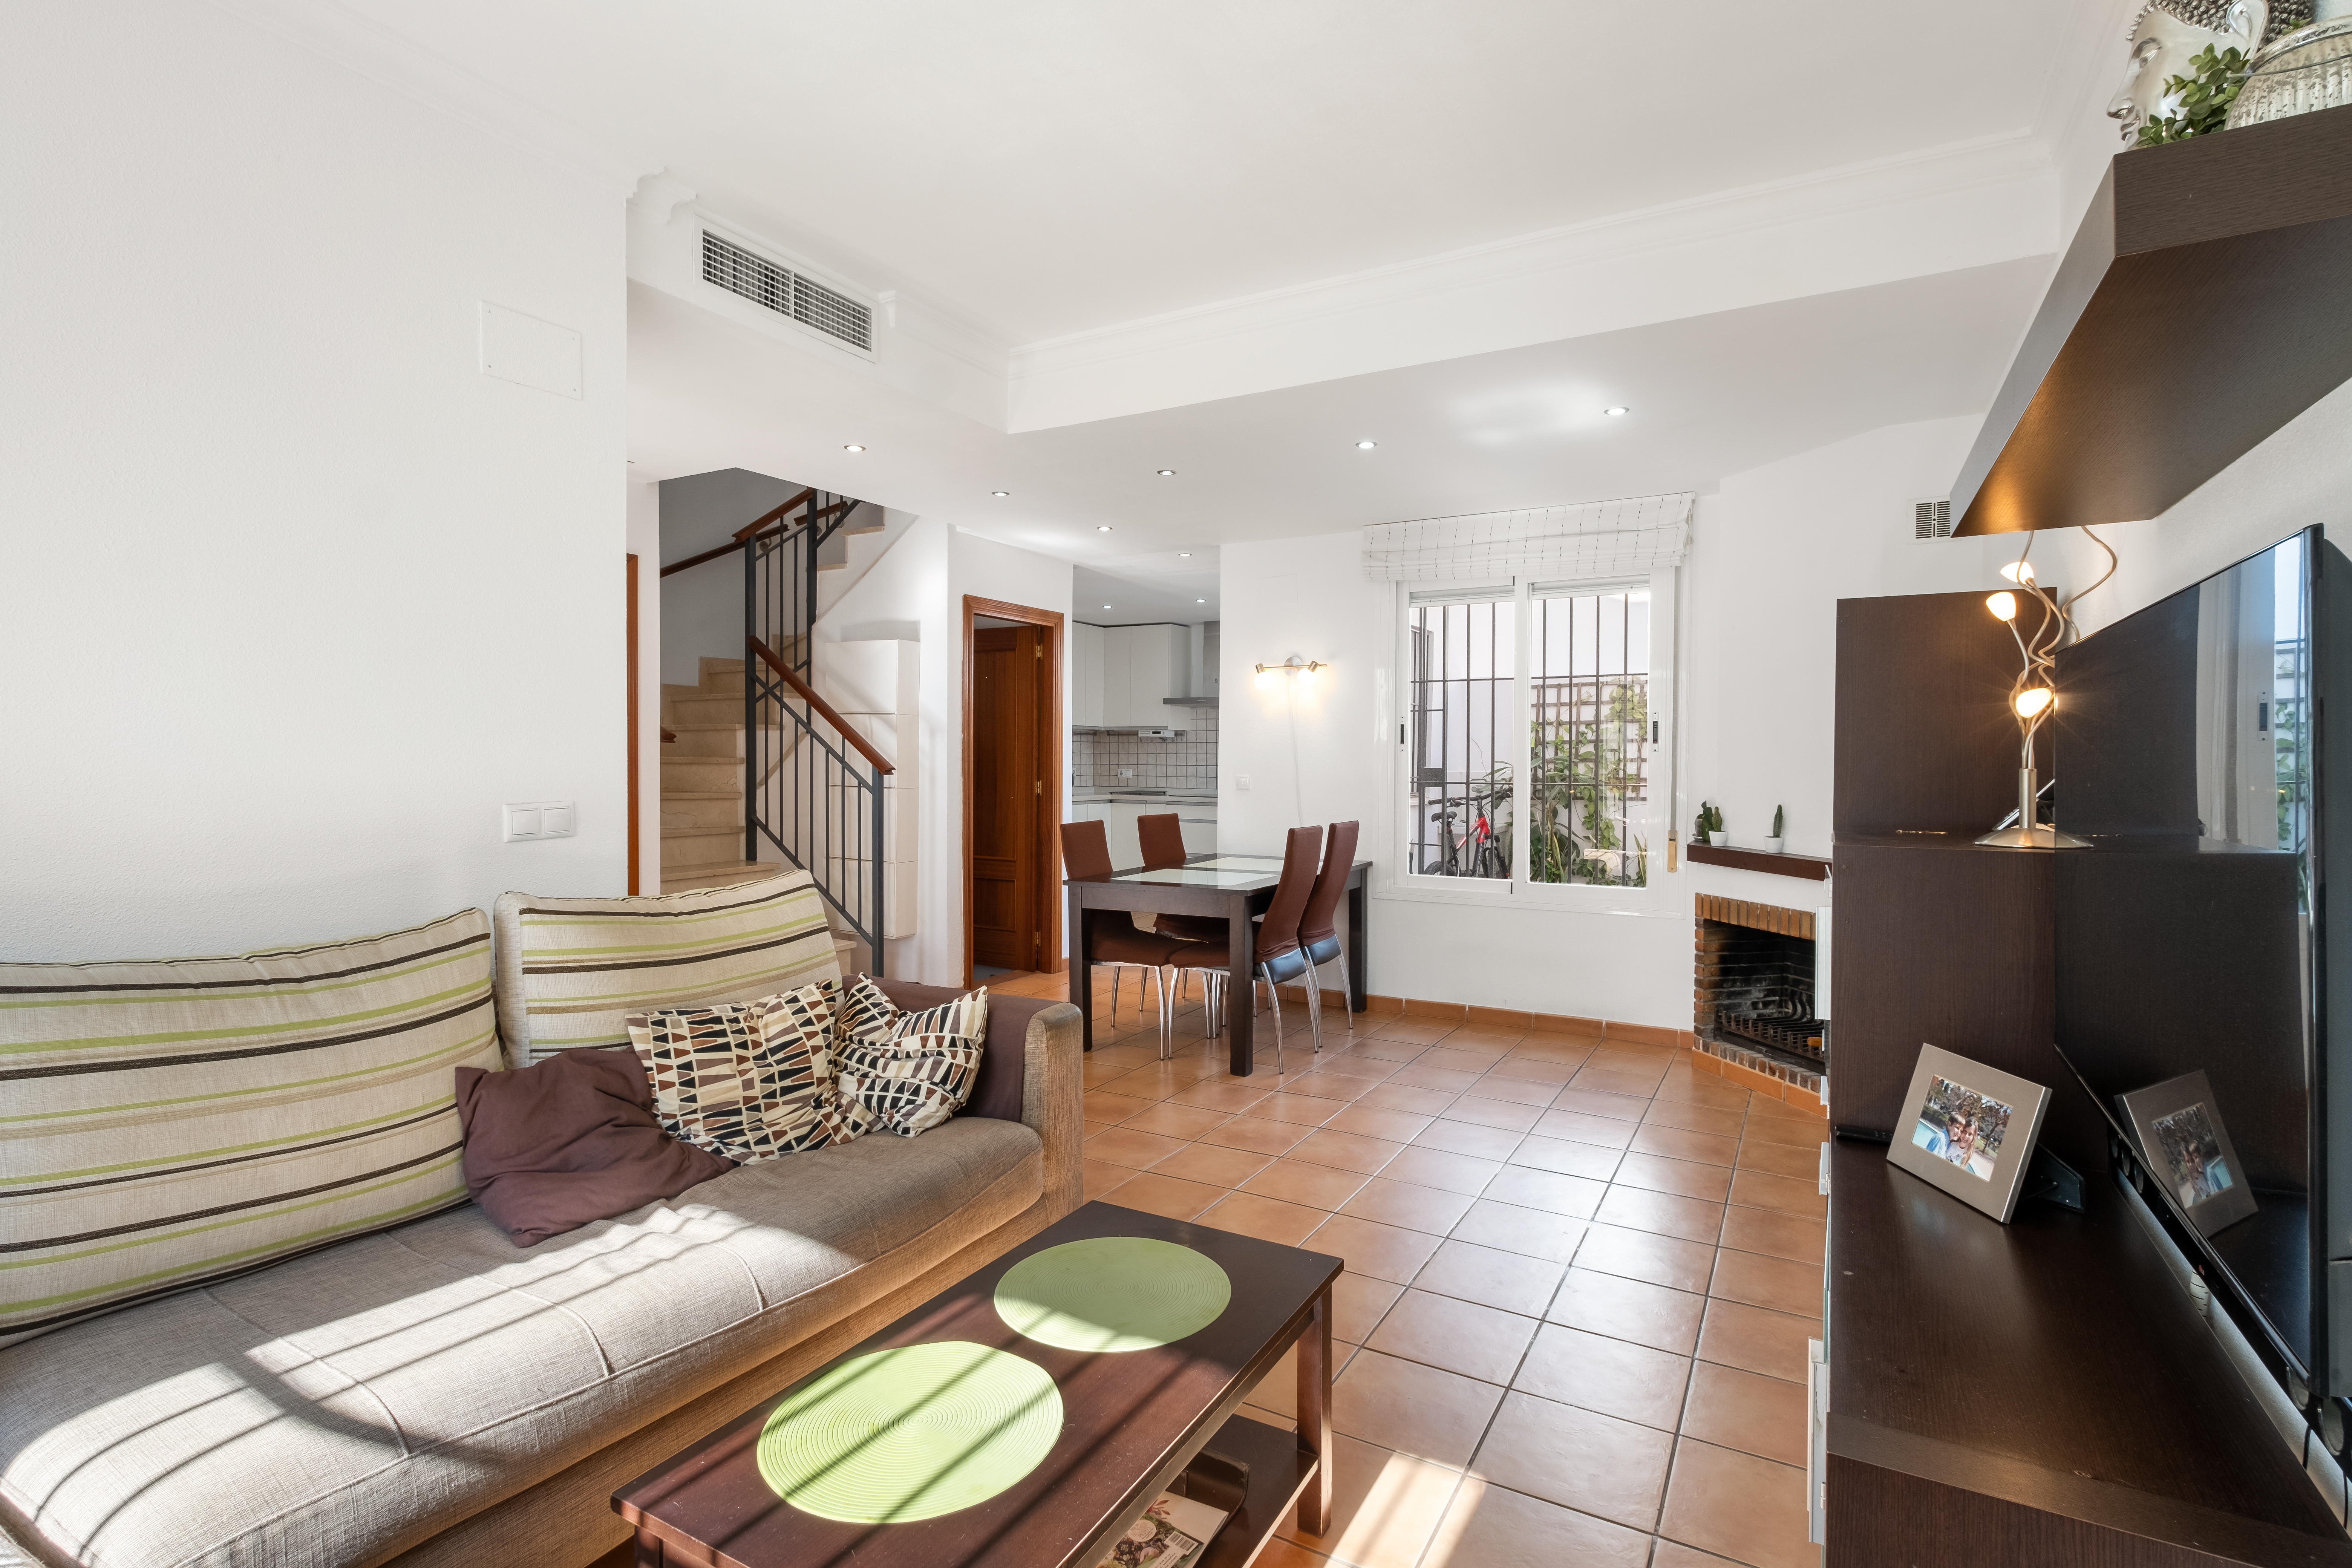 Townhouse for sale in Fuengirola 6